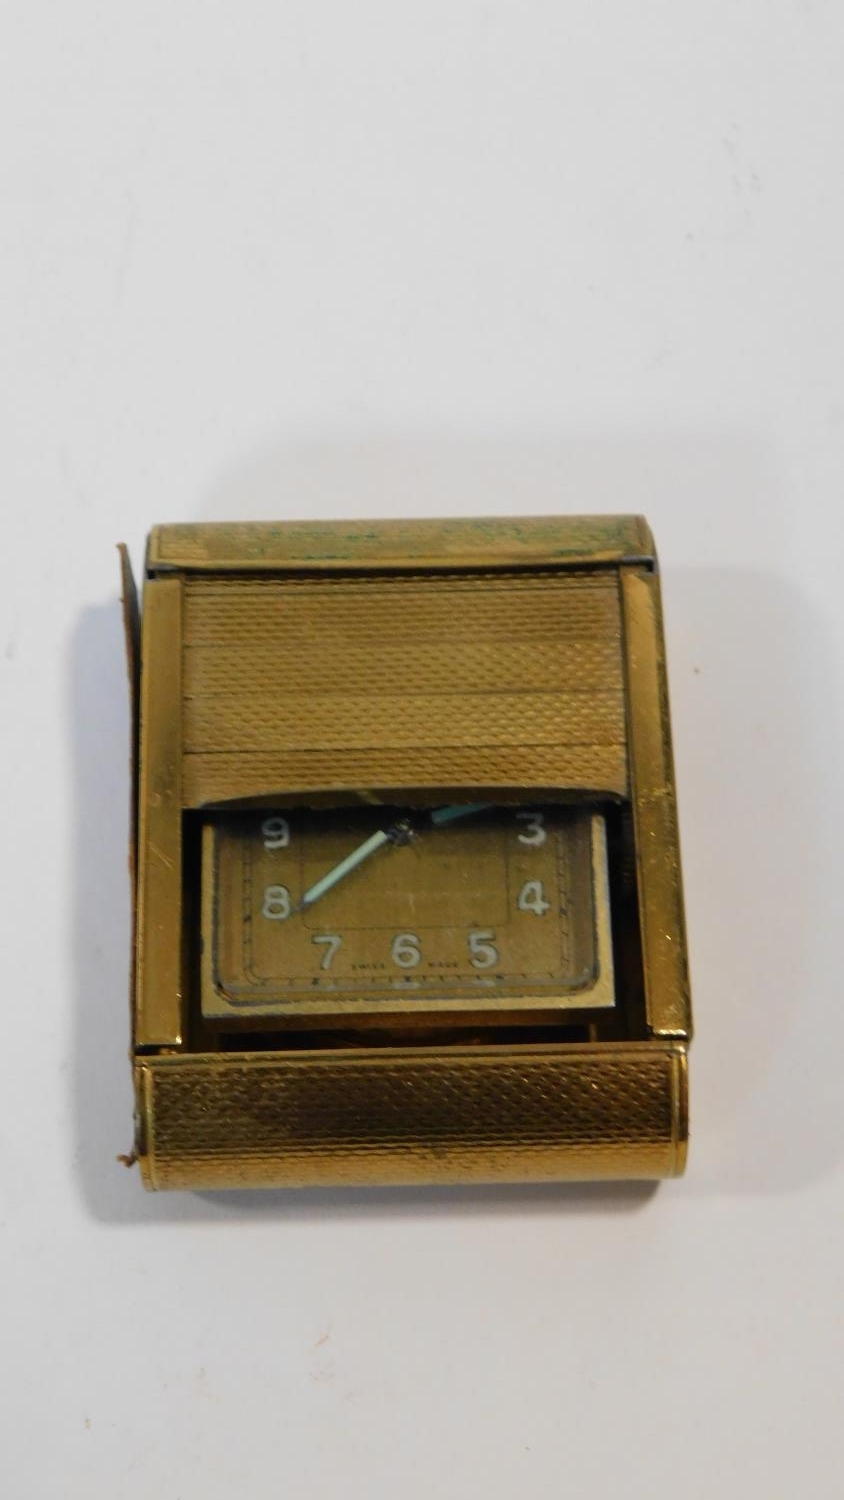 A gilt metal Swiss Made travel clock with engine turned decoration. Luminous numerals and hands.